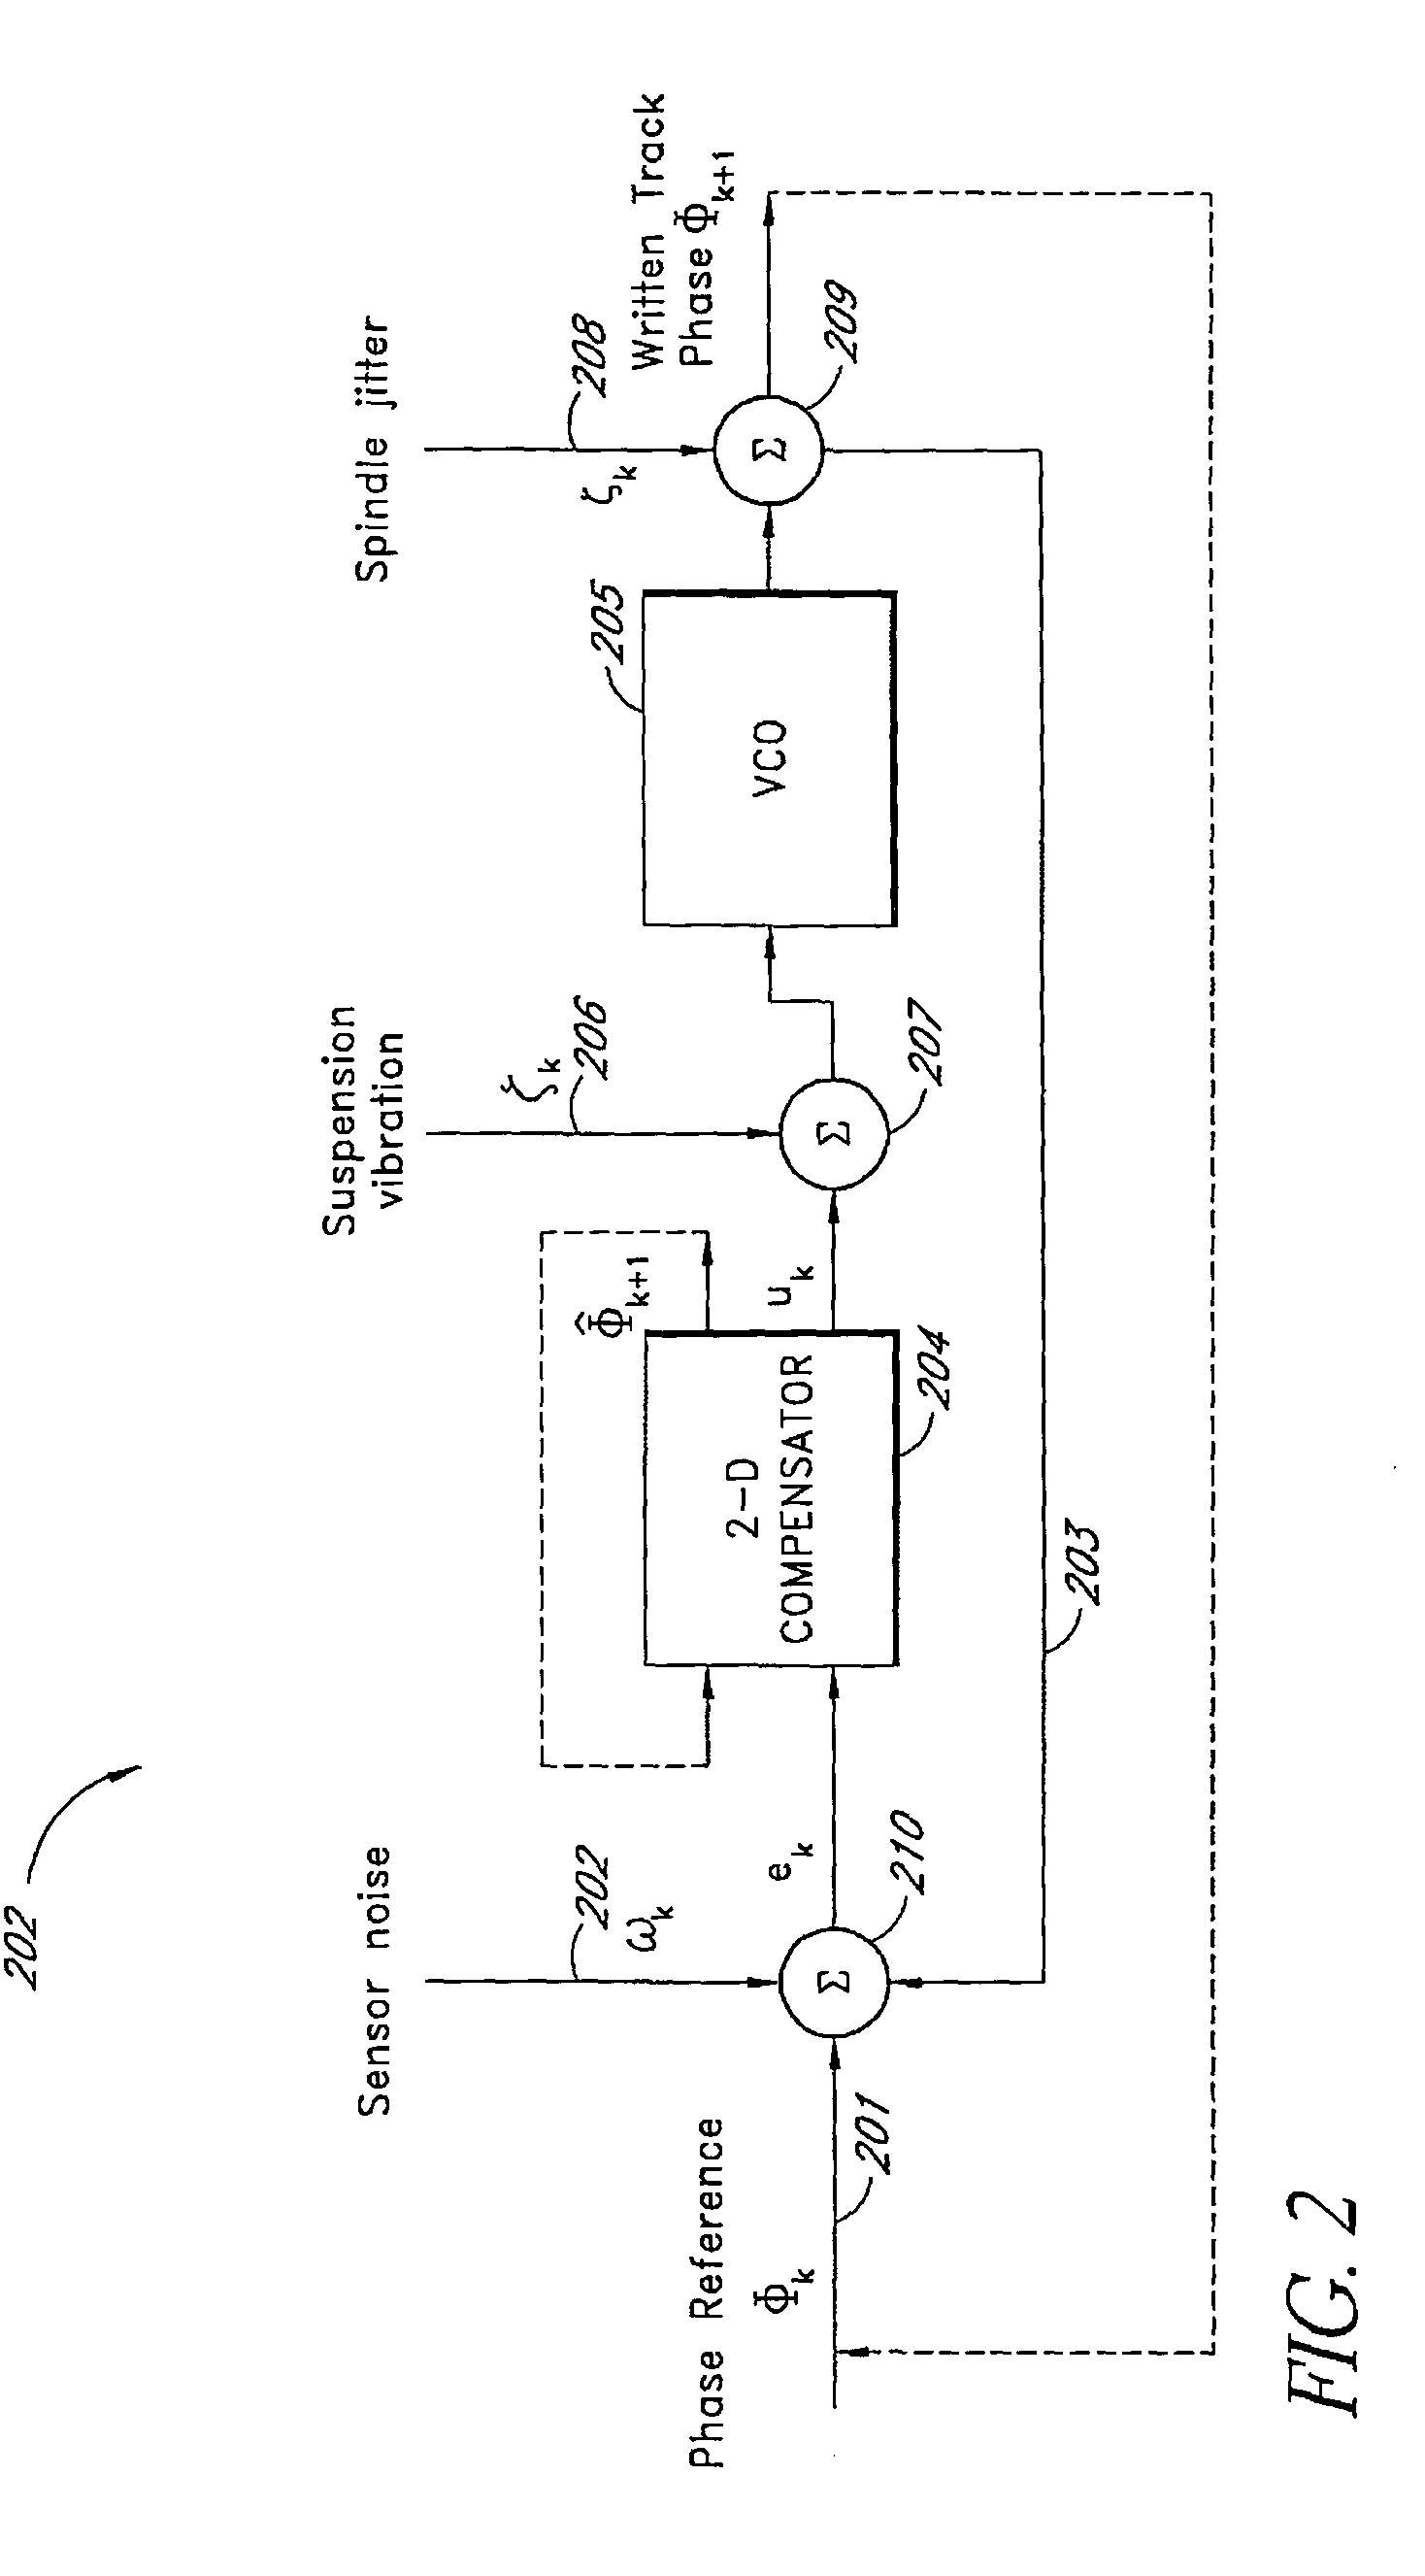 Timing compensation in a self-servowriting system